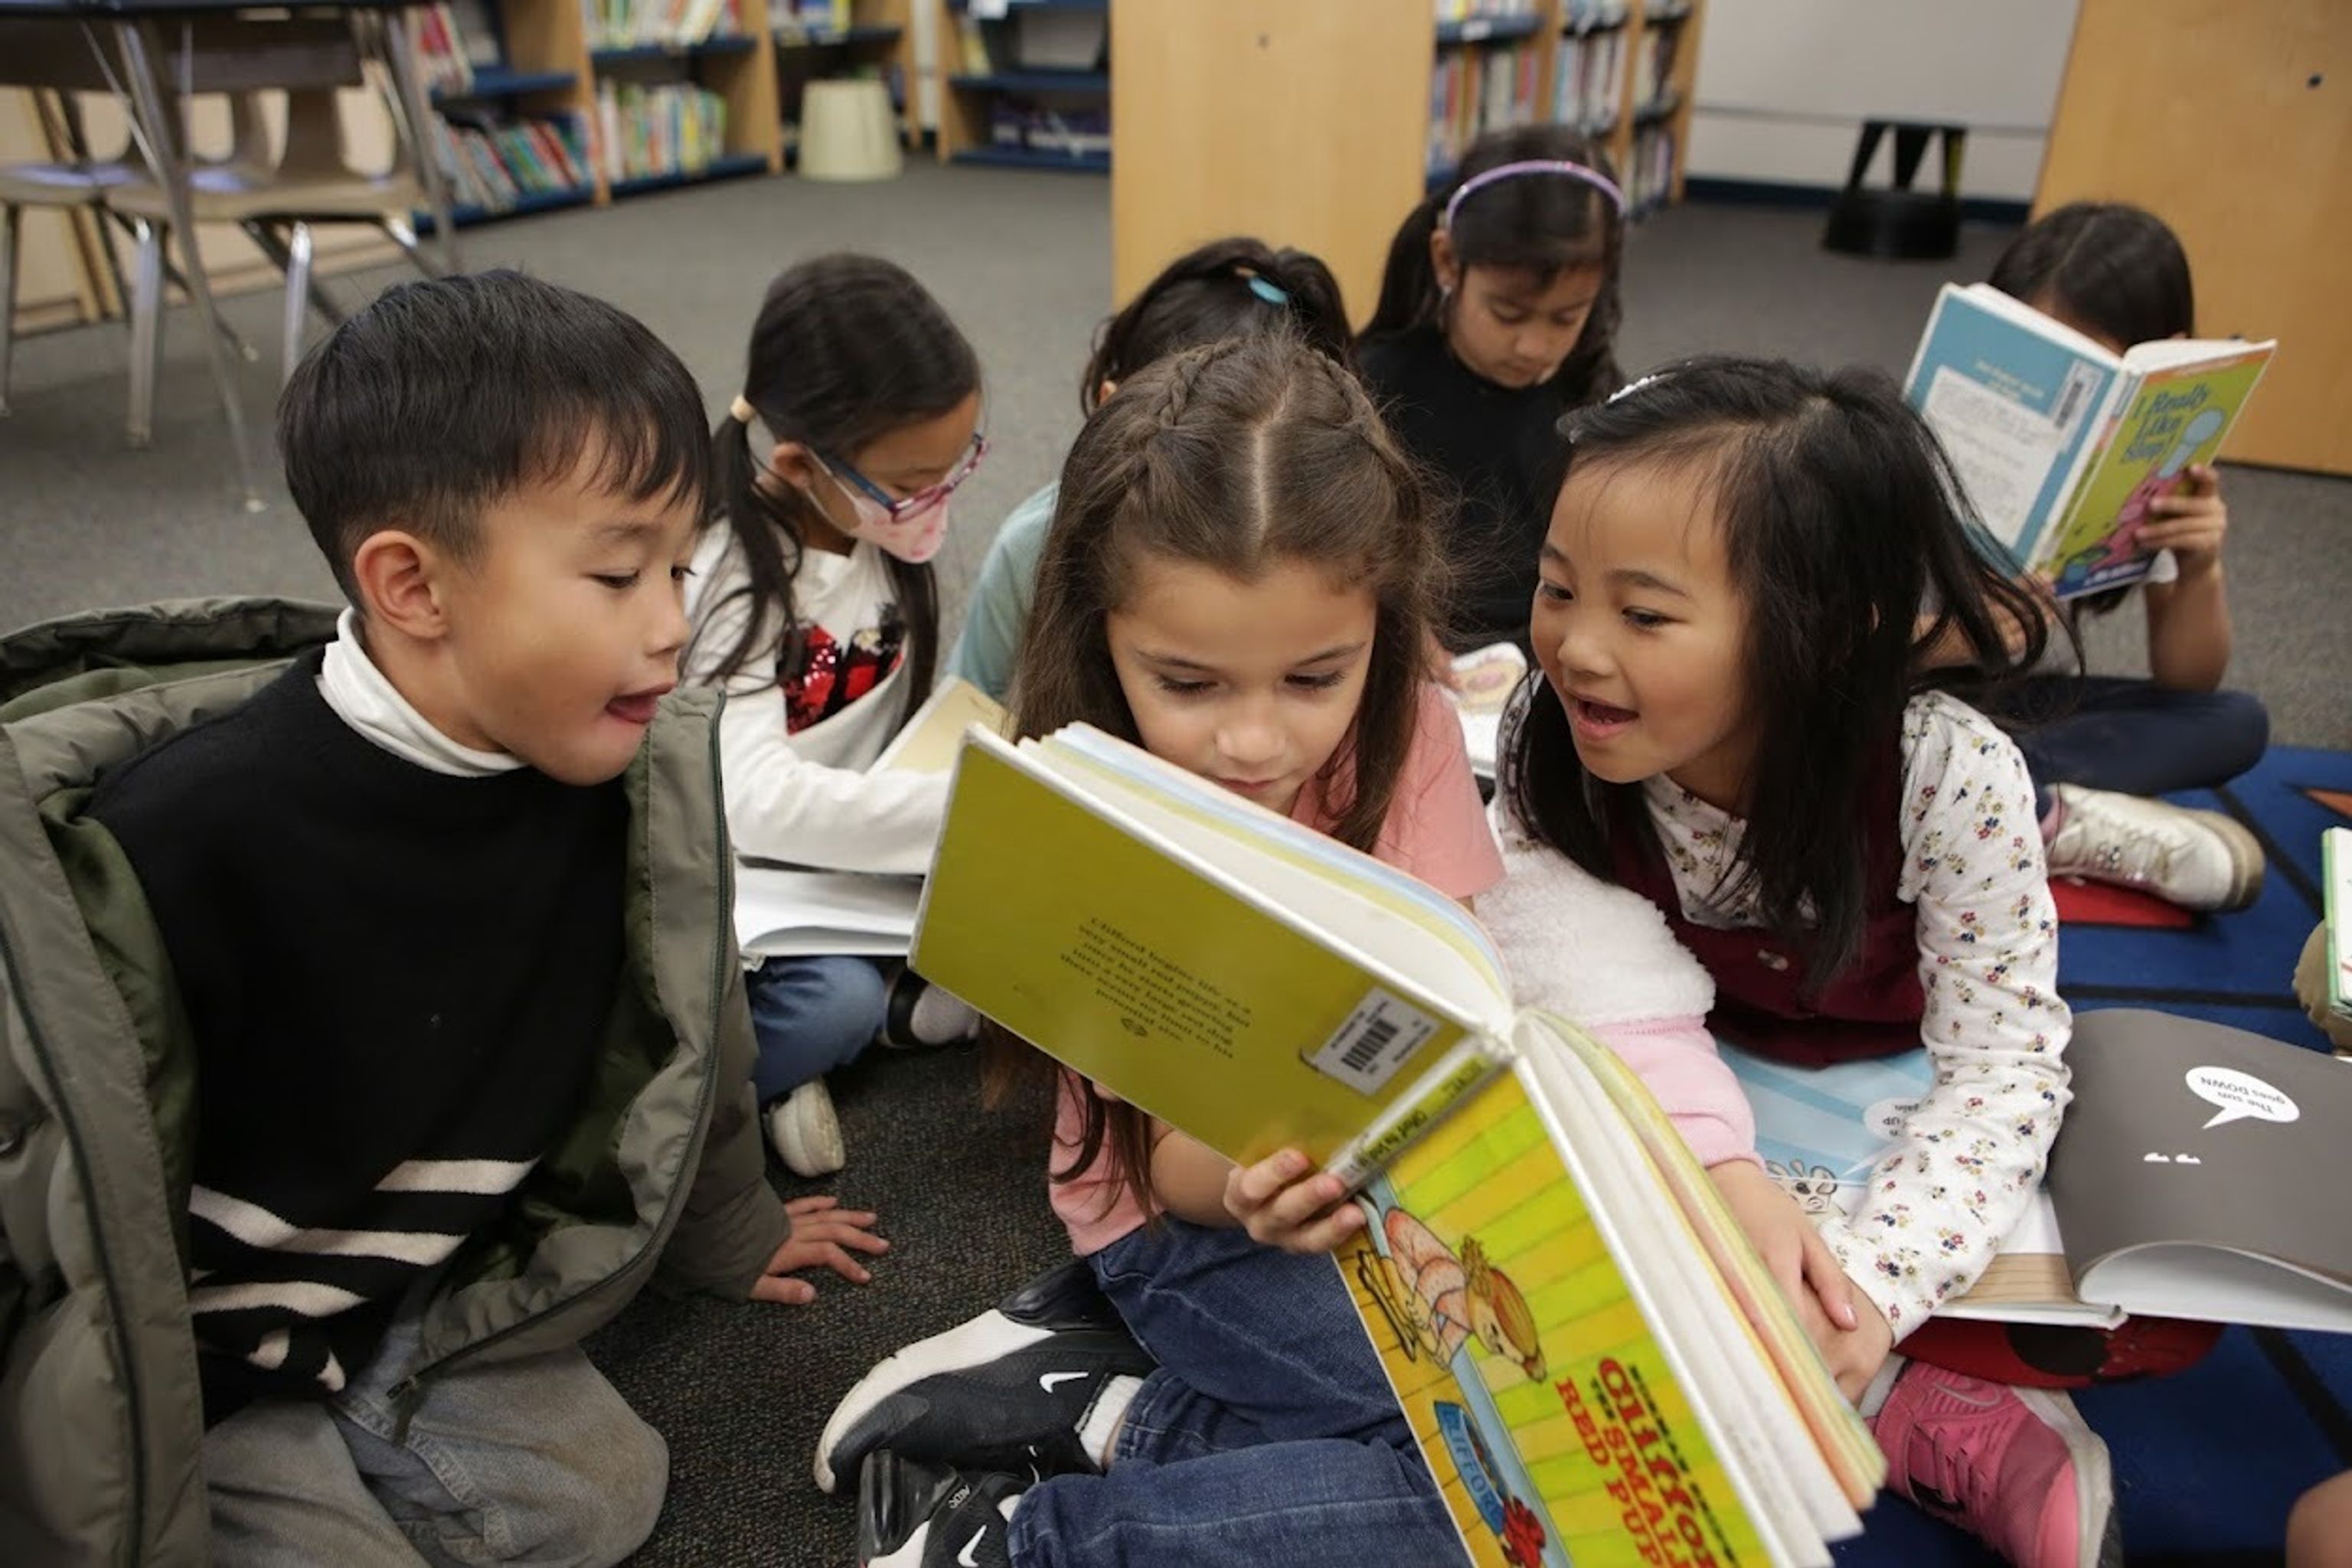 A group of children looking at a book in the library